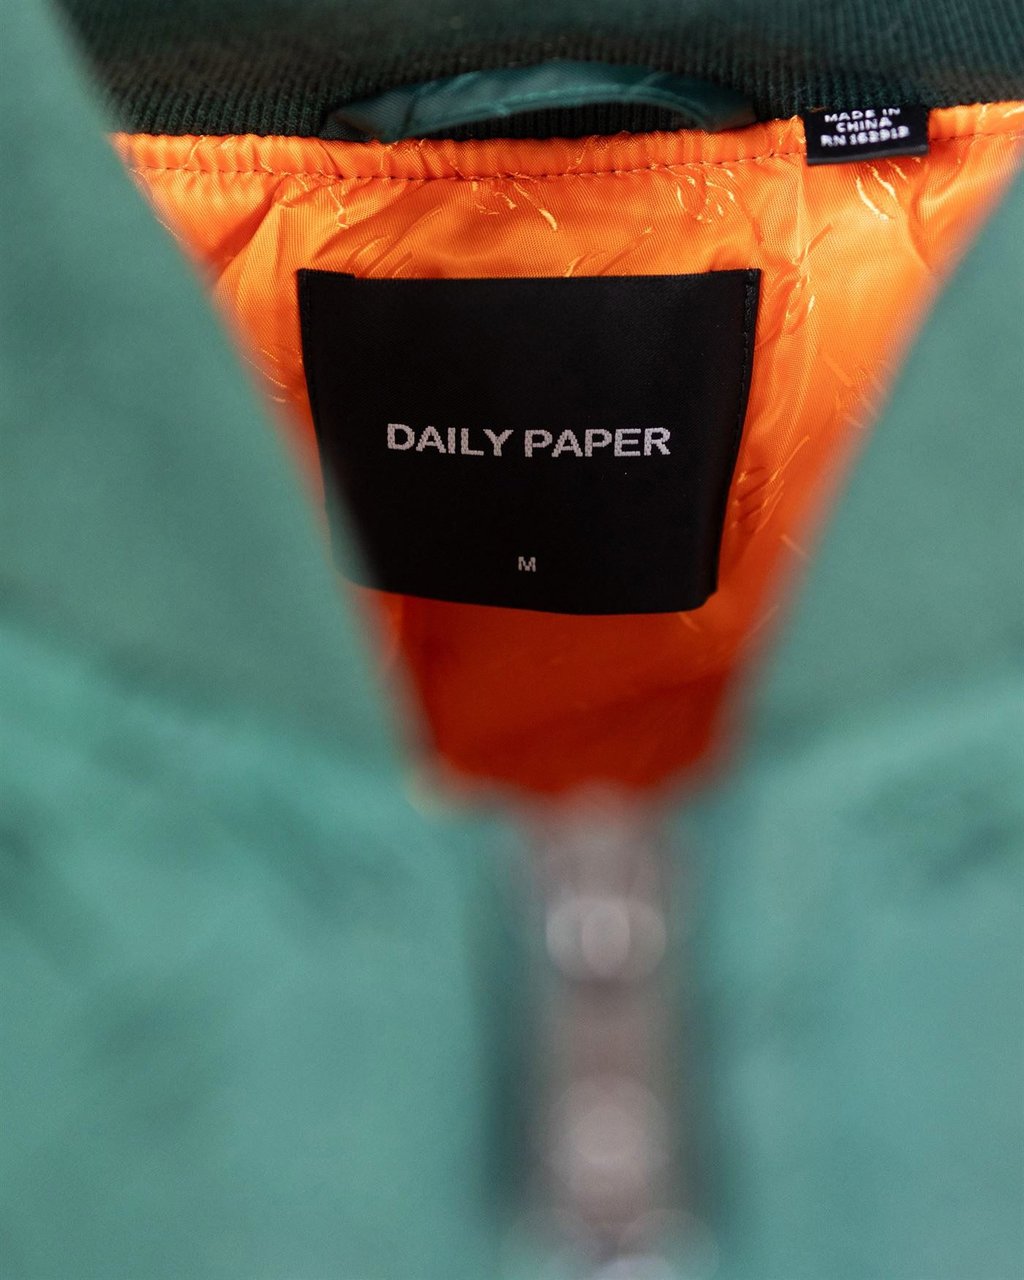 Daily Paper Daily Paper Uomo Coats Green Groen